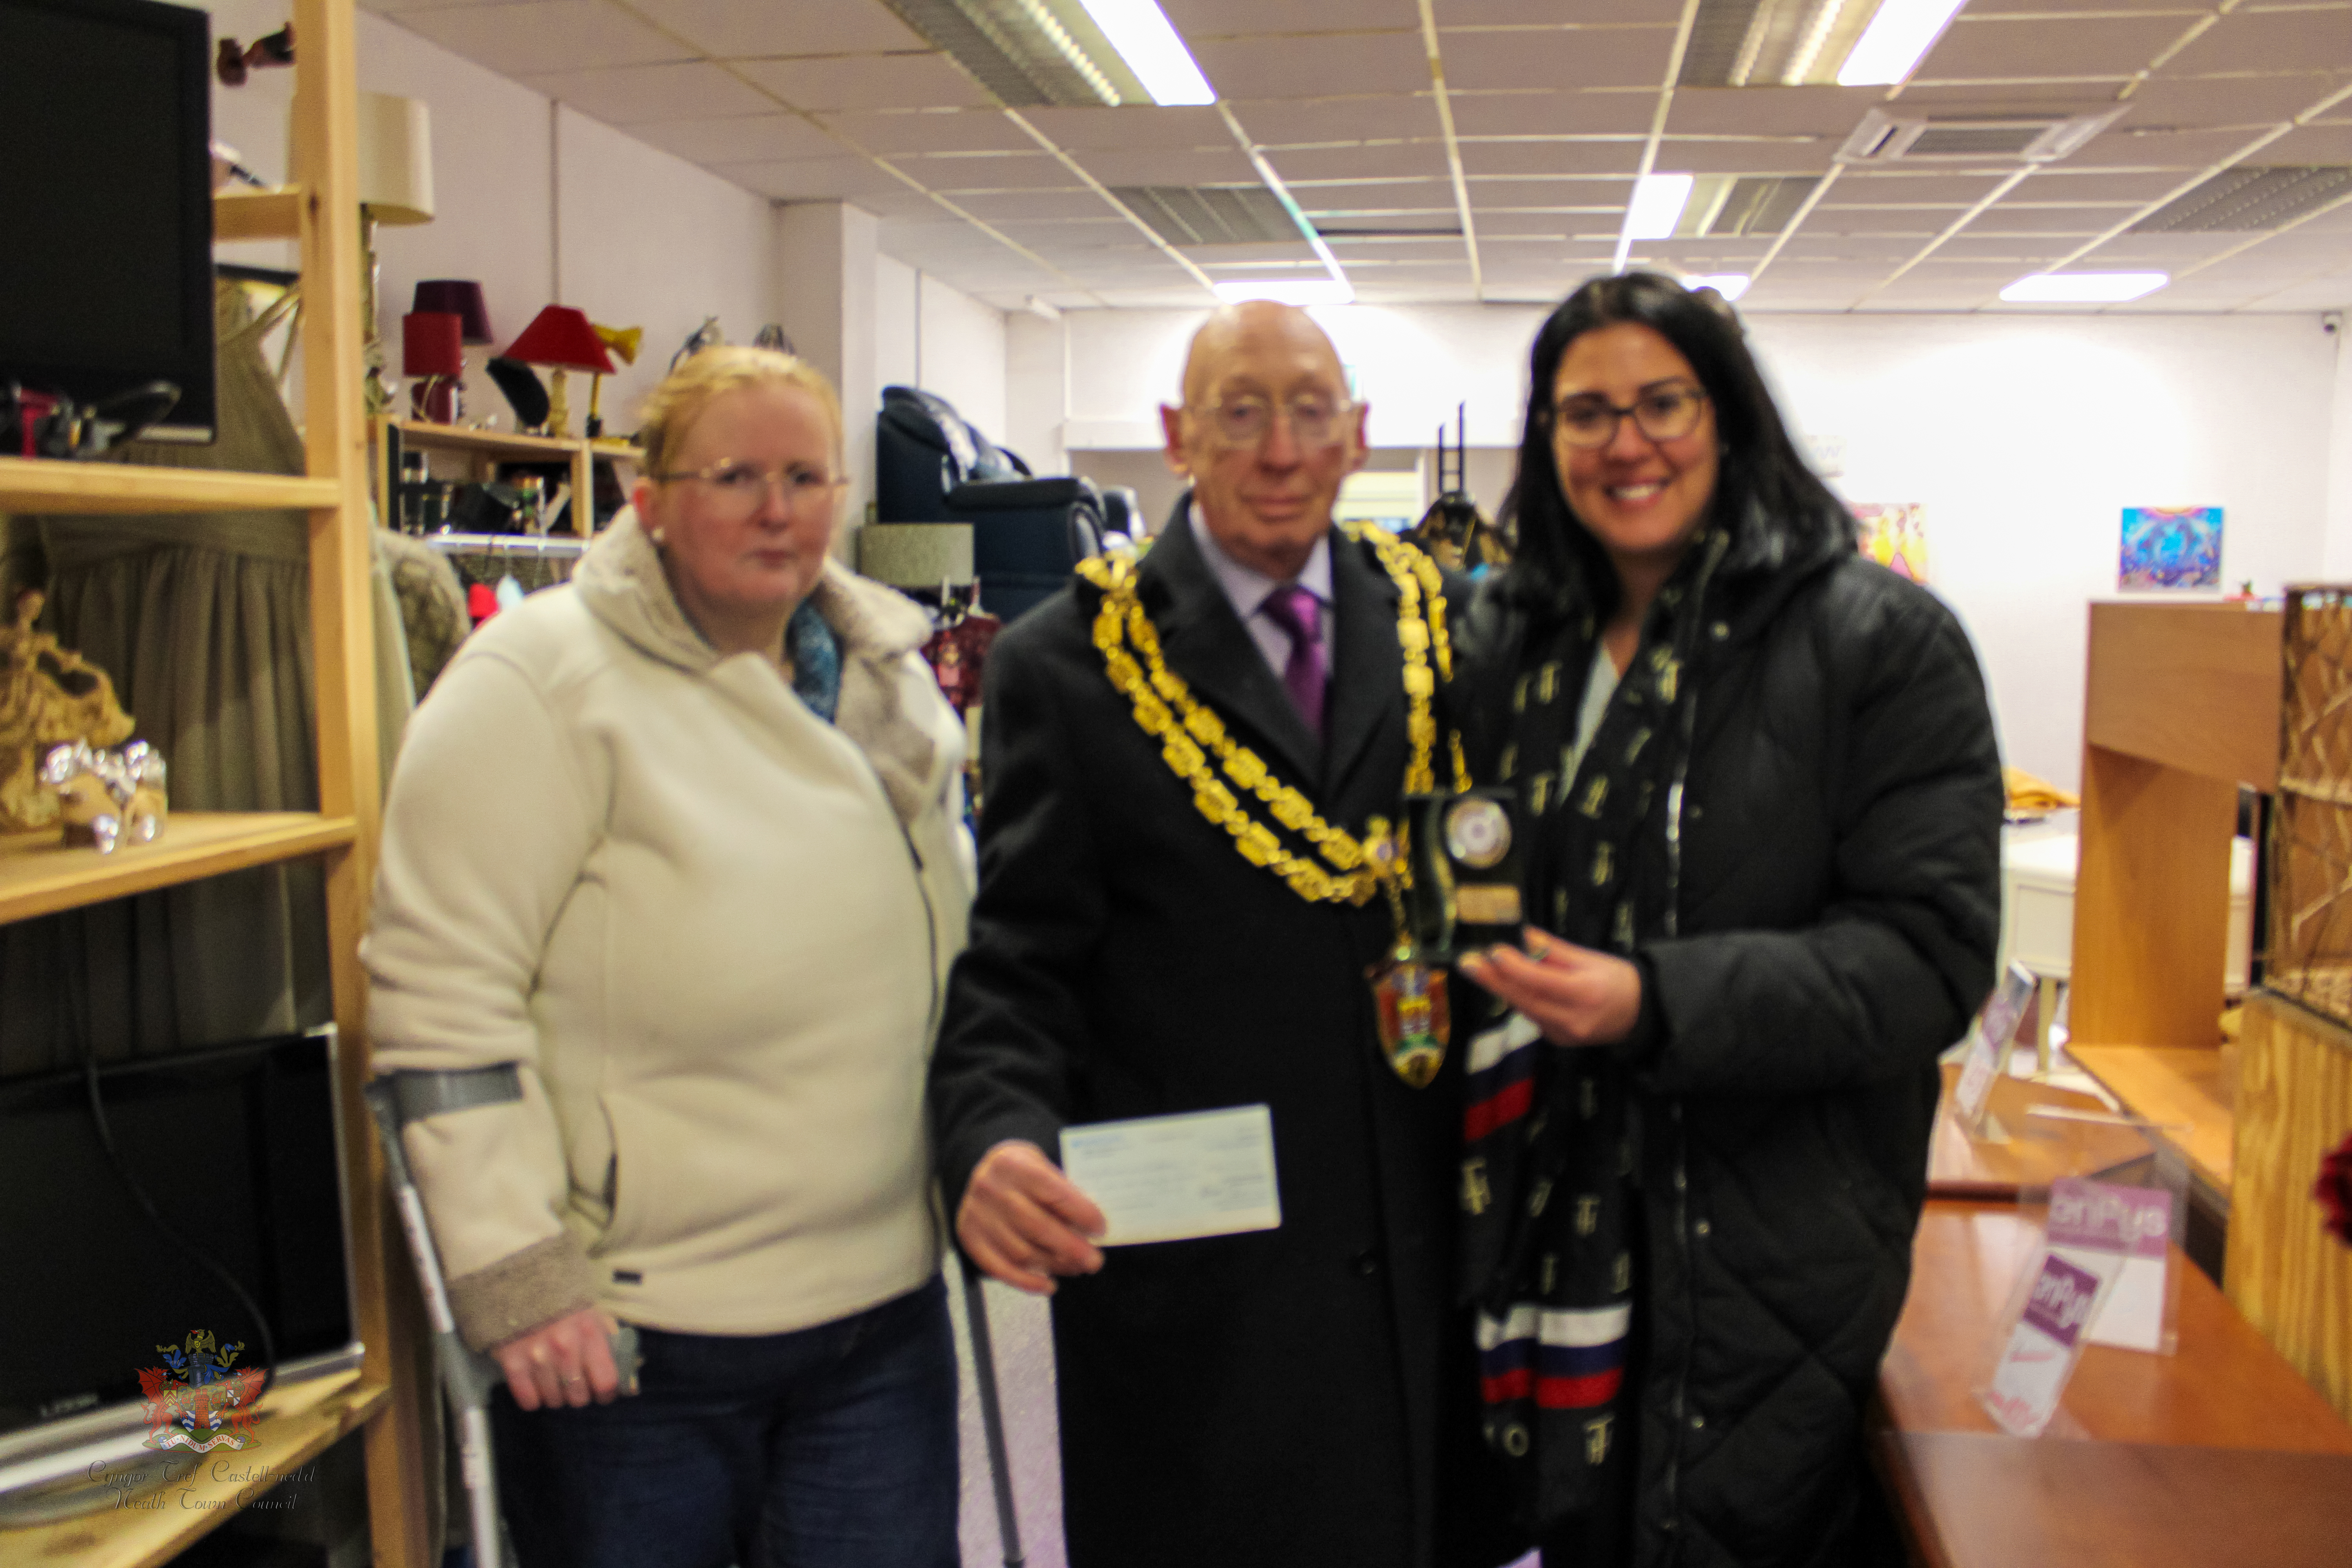 The Mayor with staff at Enfys charity shop